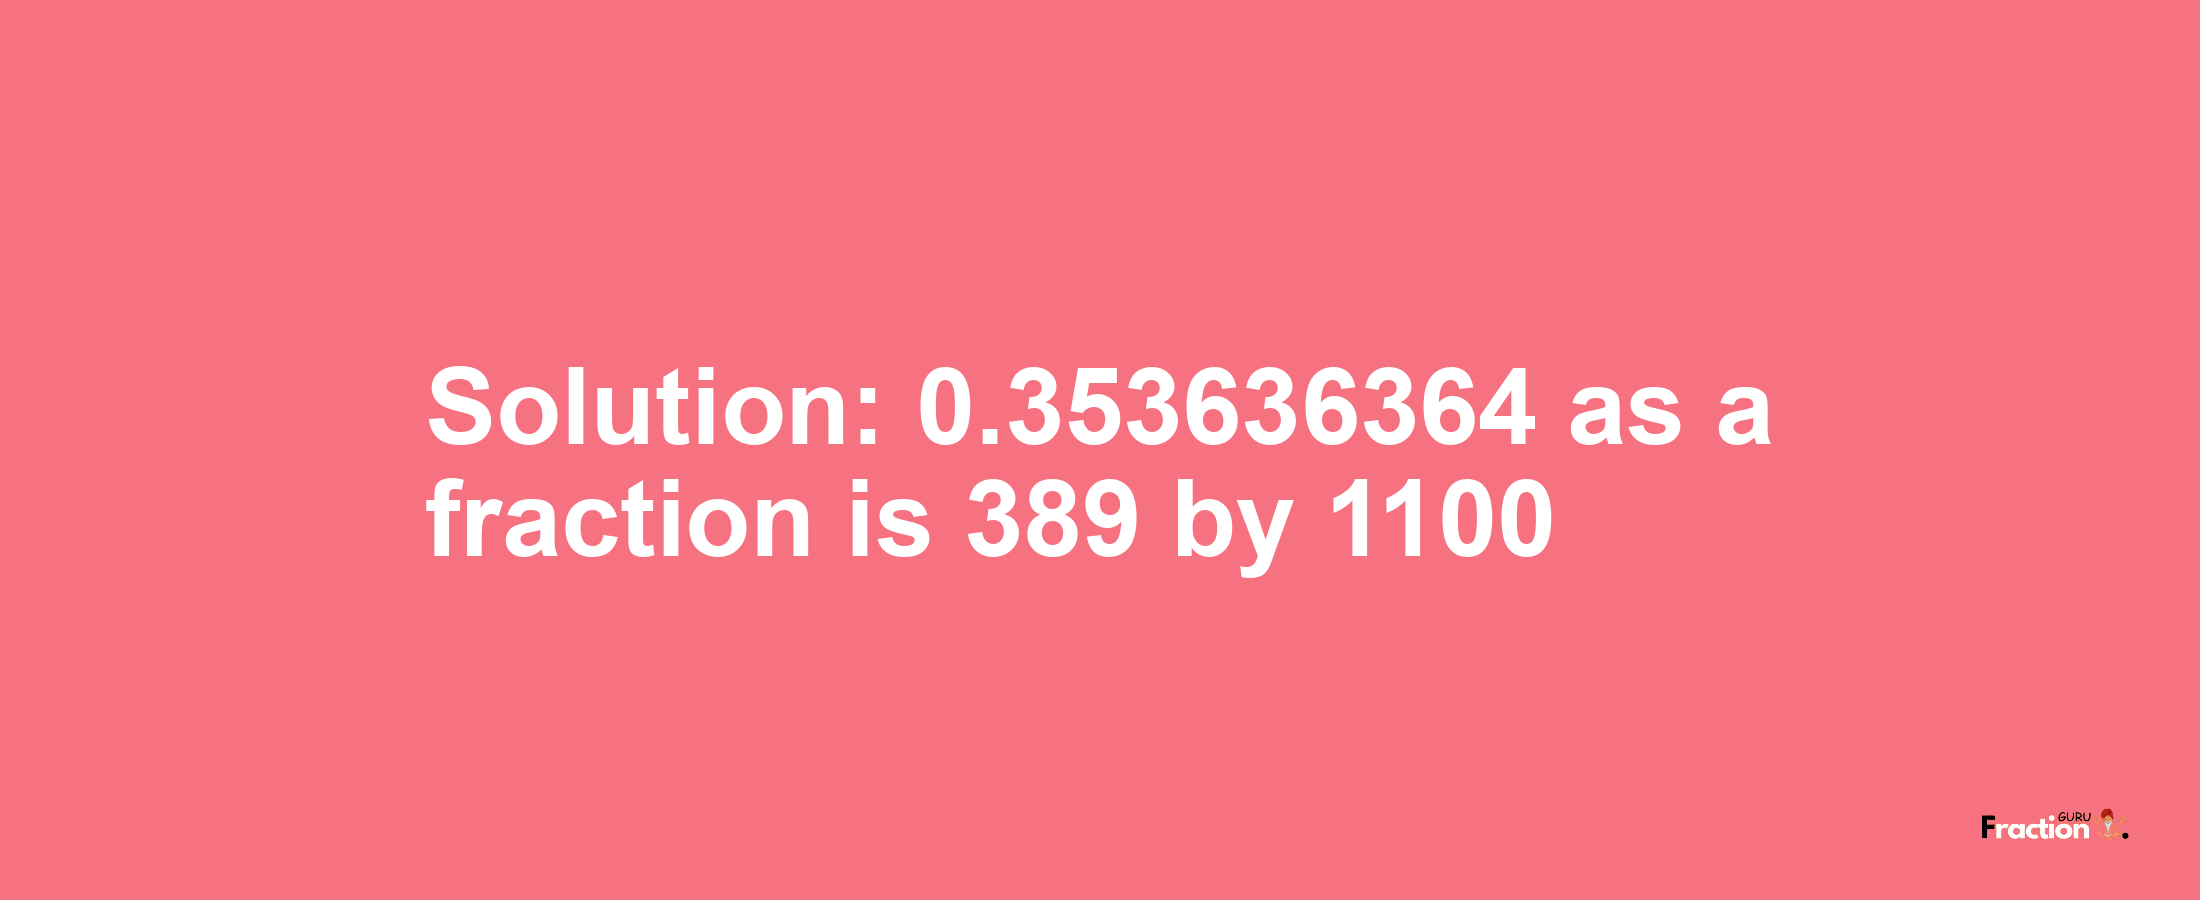 Solution:0.353636364 as a fraction is 389/1100